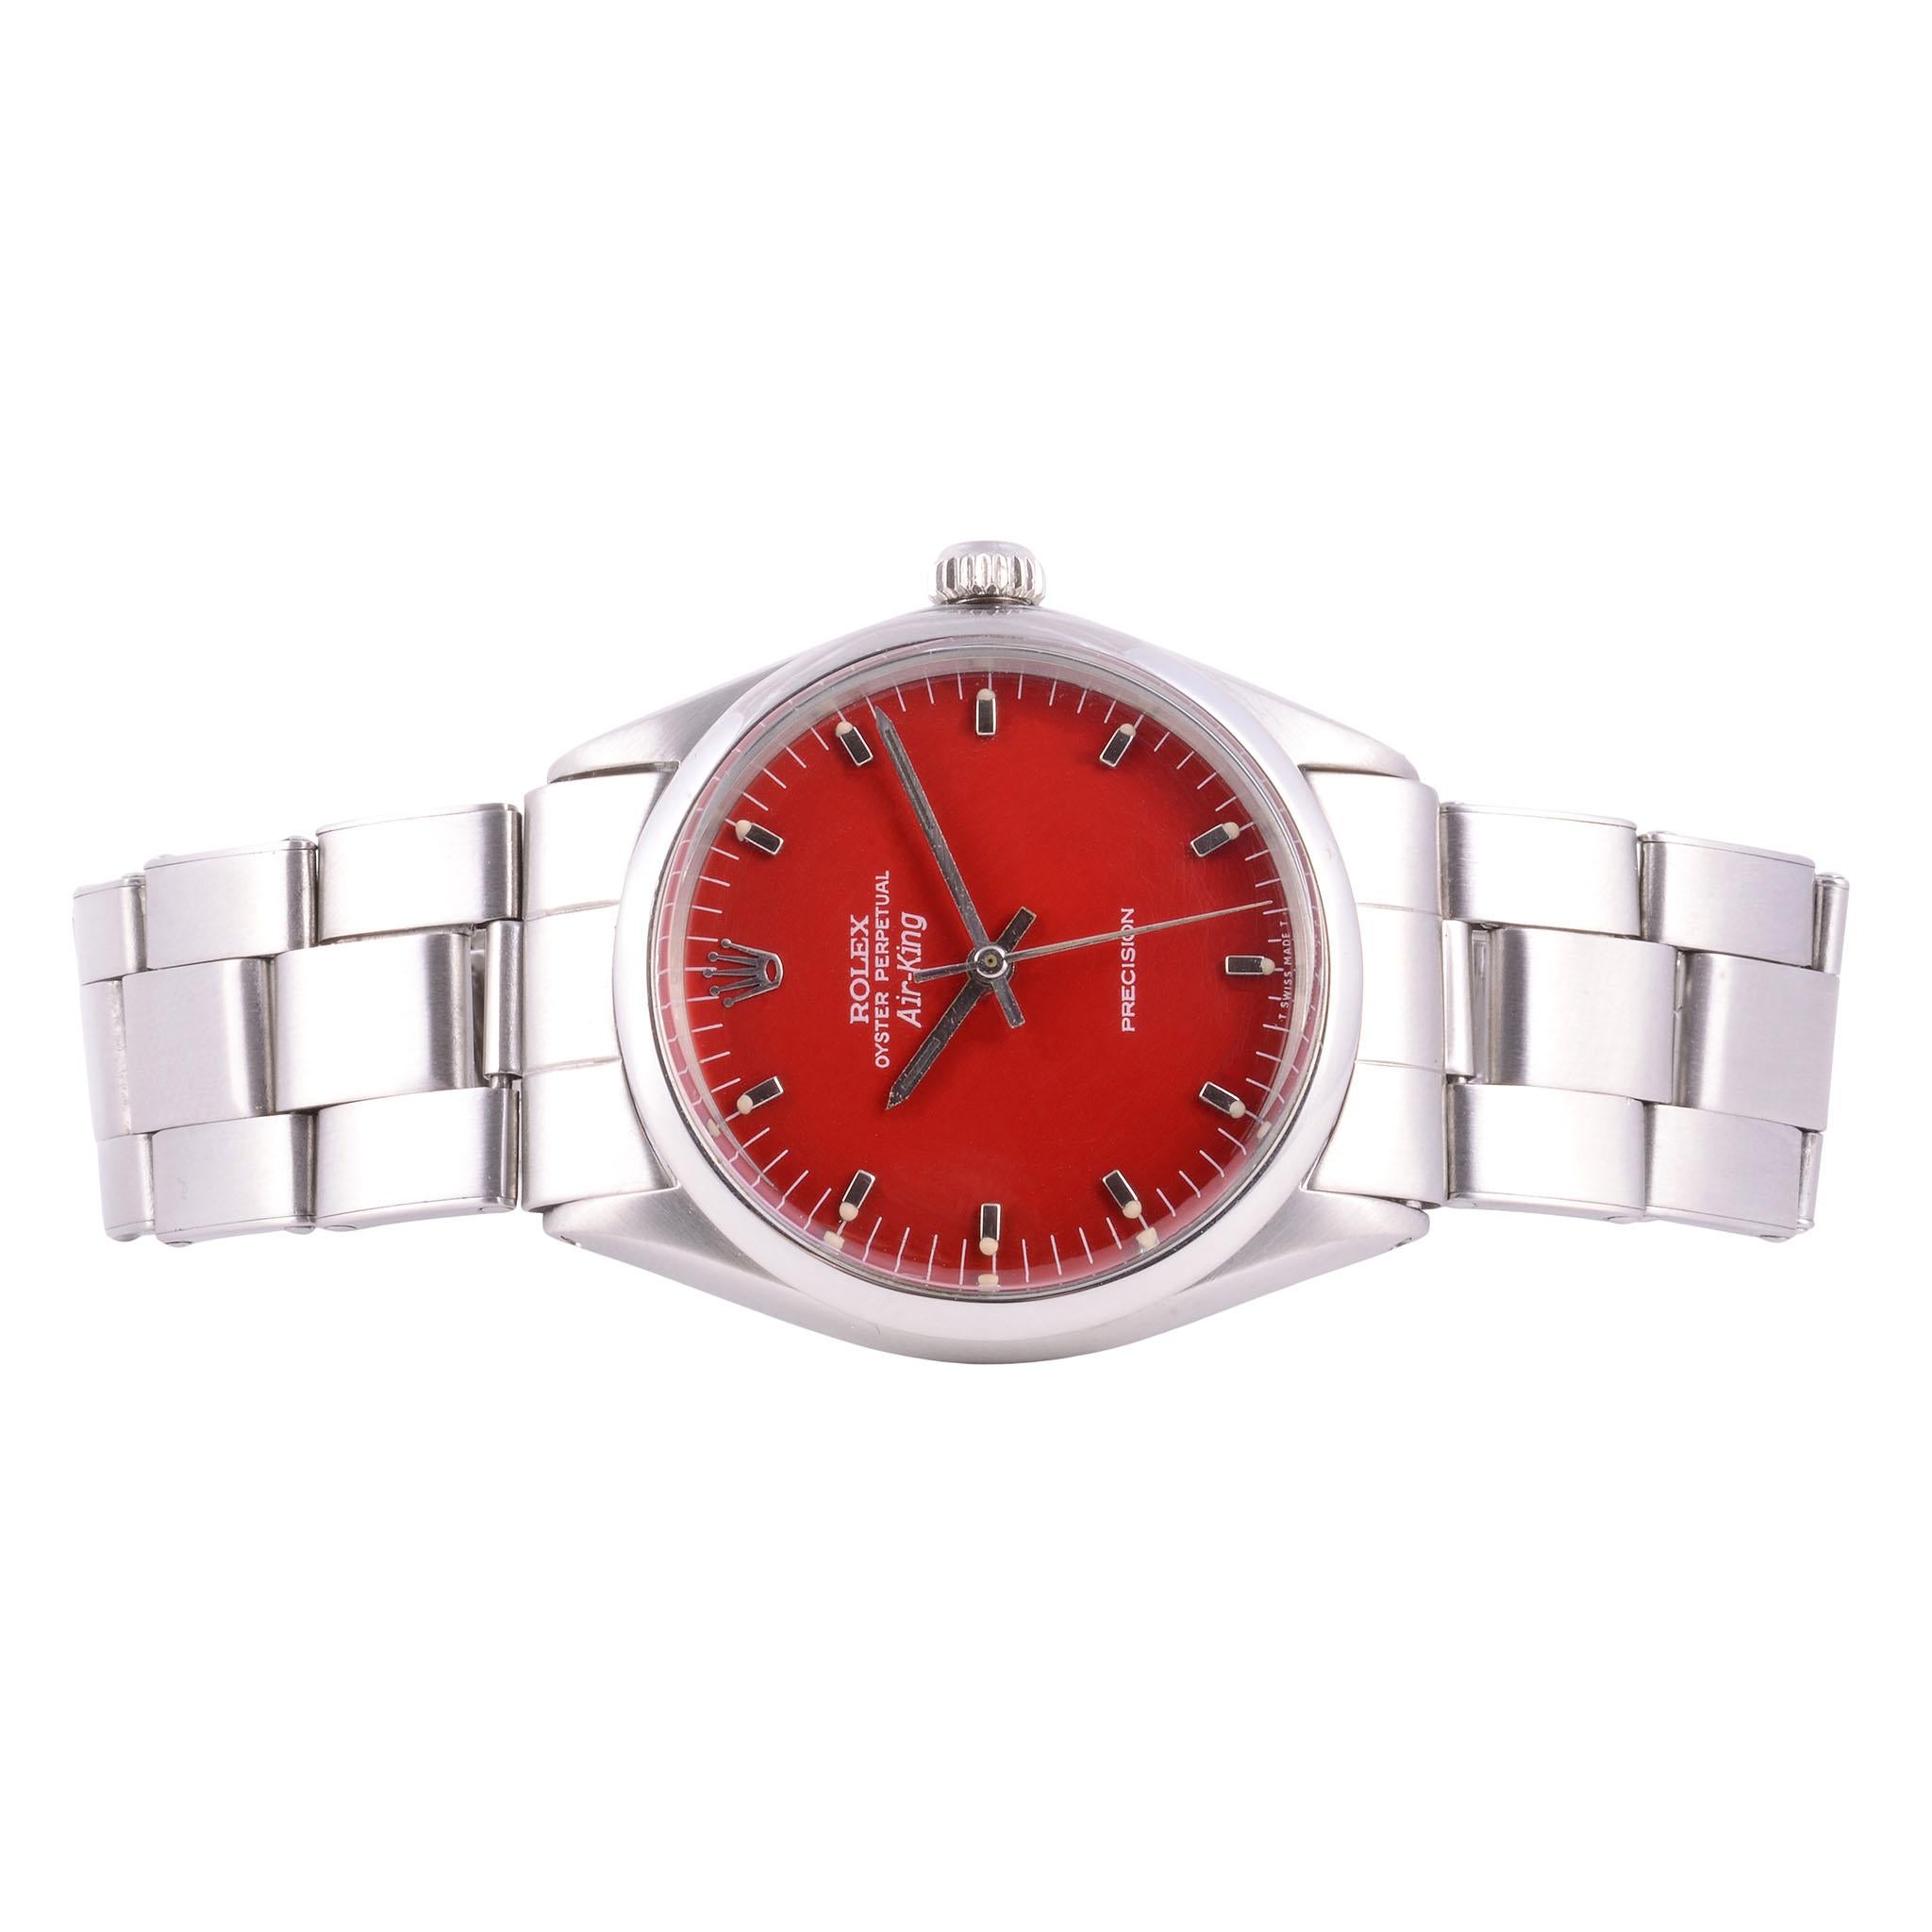 Vintage Rolex Air King red dial wrist watch, circa 1970. This steel Rolex watch features a custom red restored original dial and a 26 jewel perpetual movement. The Rolex Air King is in excellent condition. Cal 1500, Case #2453429, Ref #5500. [JVSS